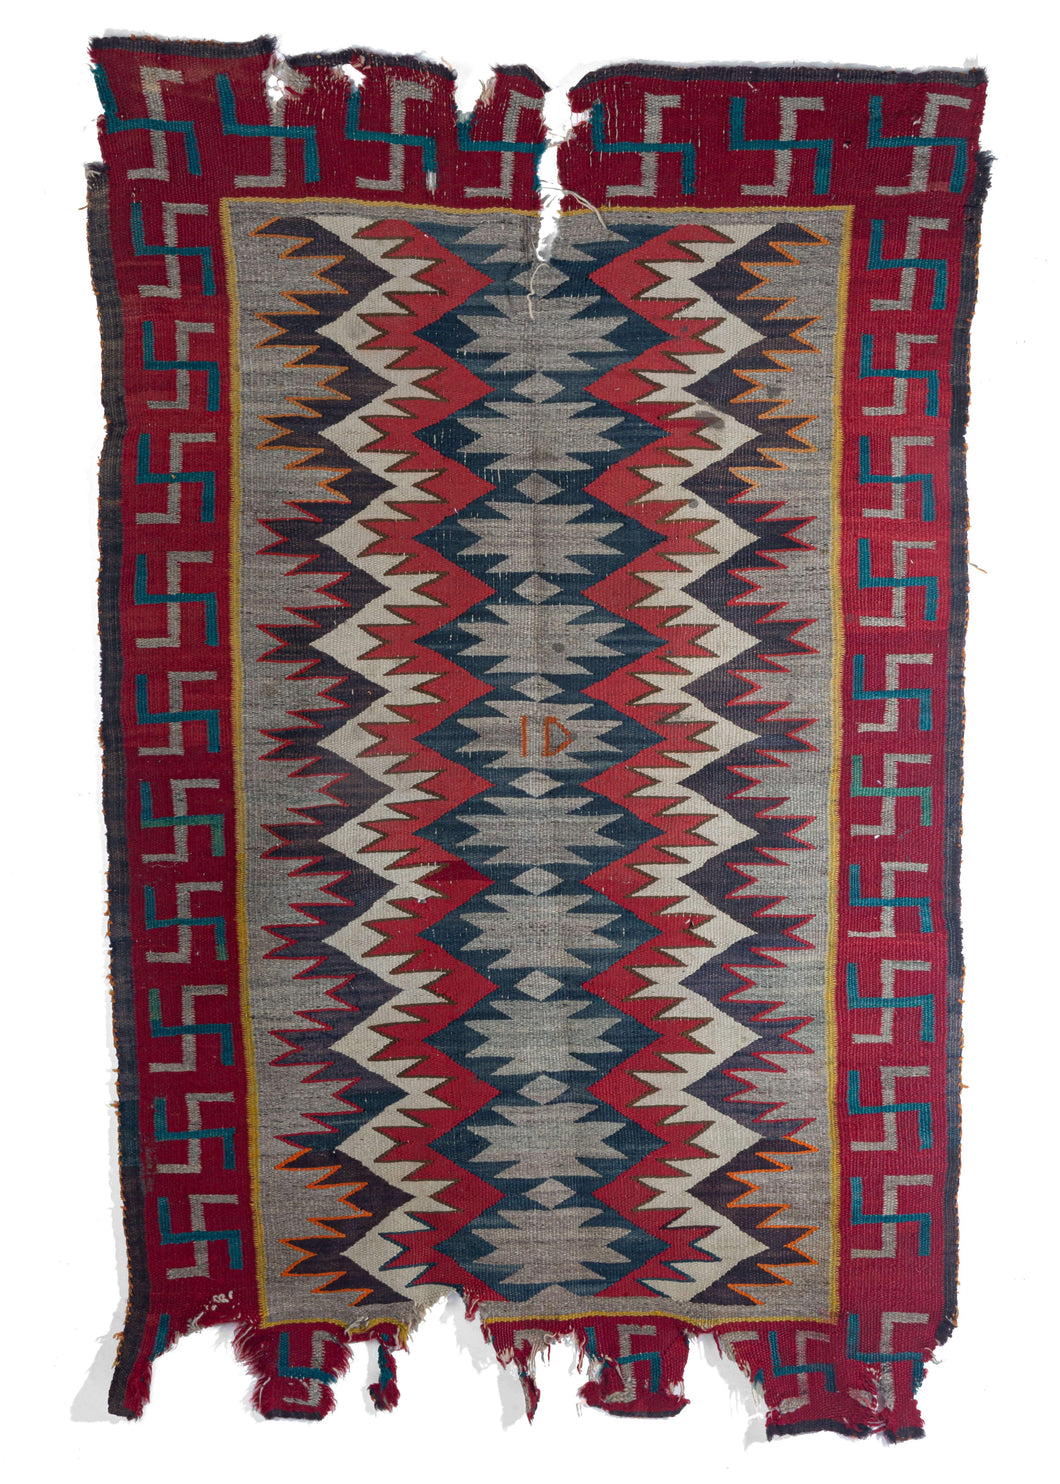 Antique Navajo Eye Dazzler ID Kilim Flatwoven blanket that is quite torn on the border areas, bright and colorful with some staining as well